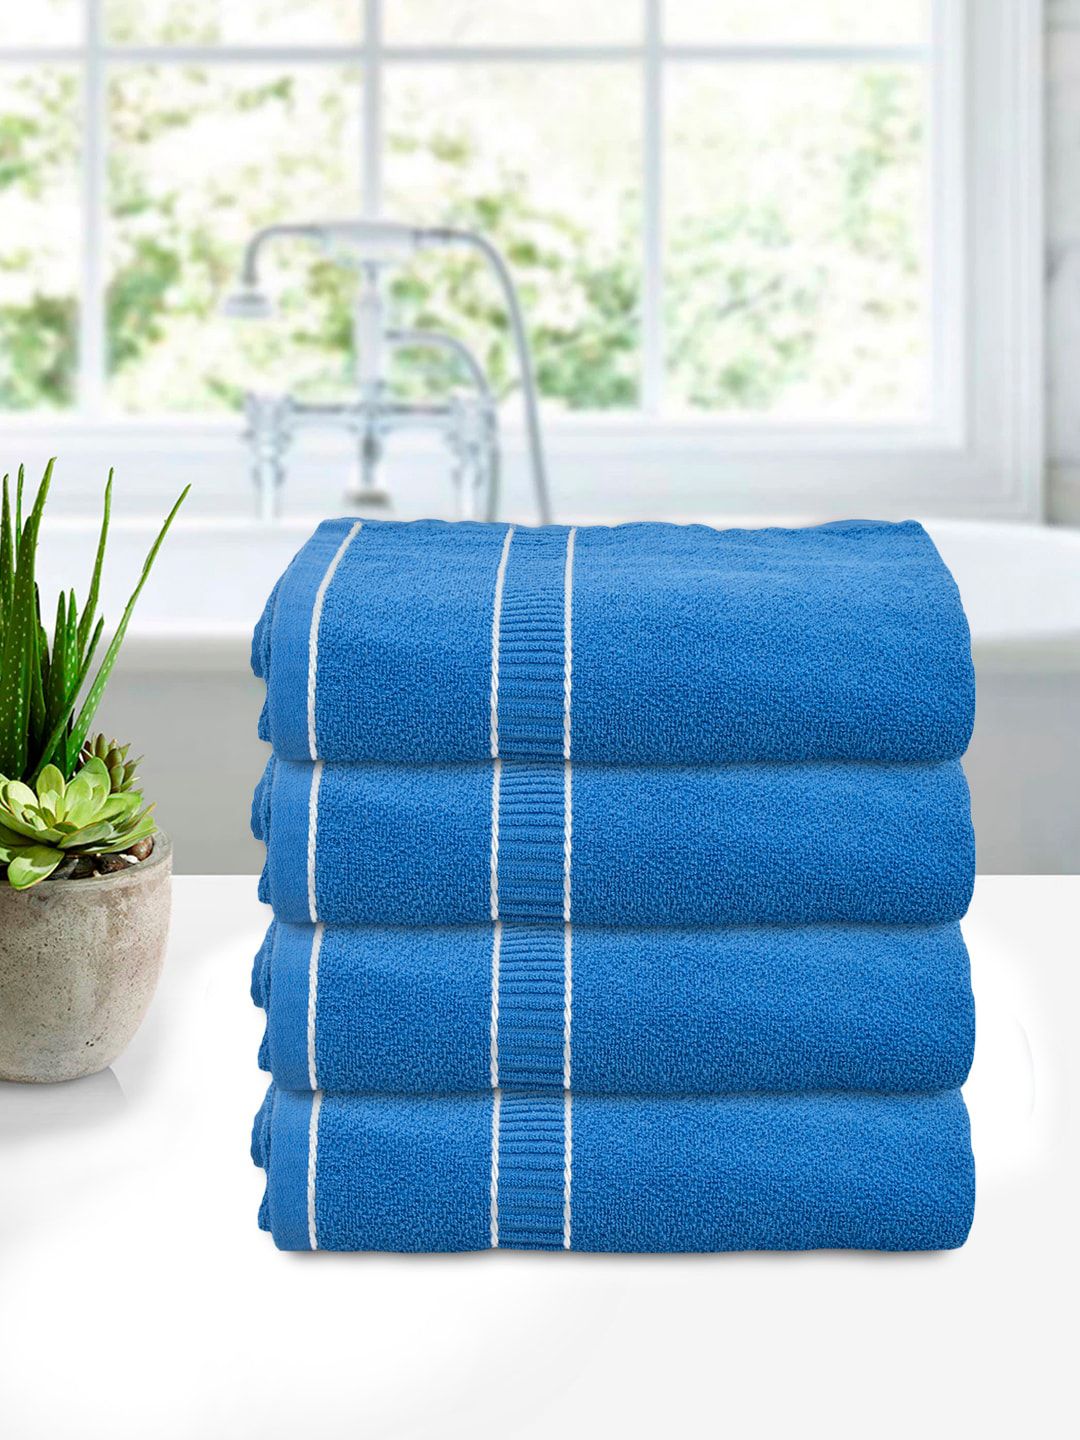 Kuber Industries Set Of 4 Blue Solid 400 GSM Cotton Bath Towels Price in India